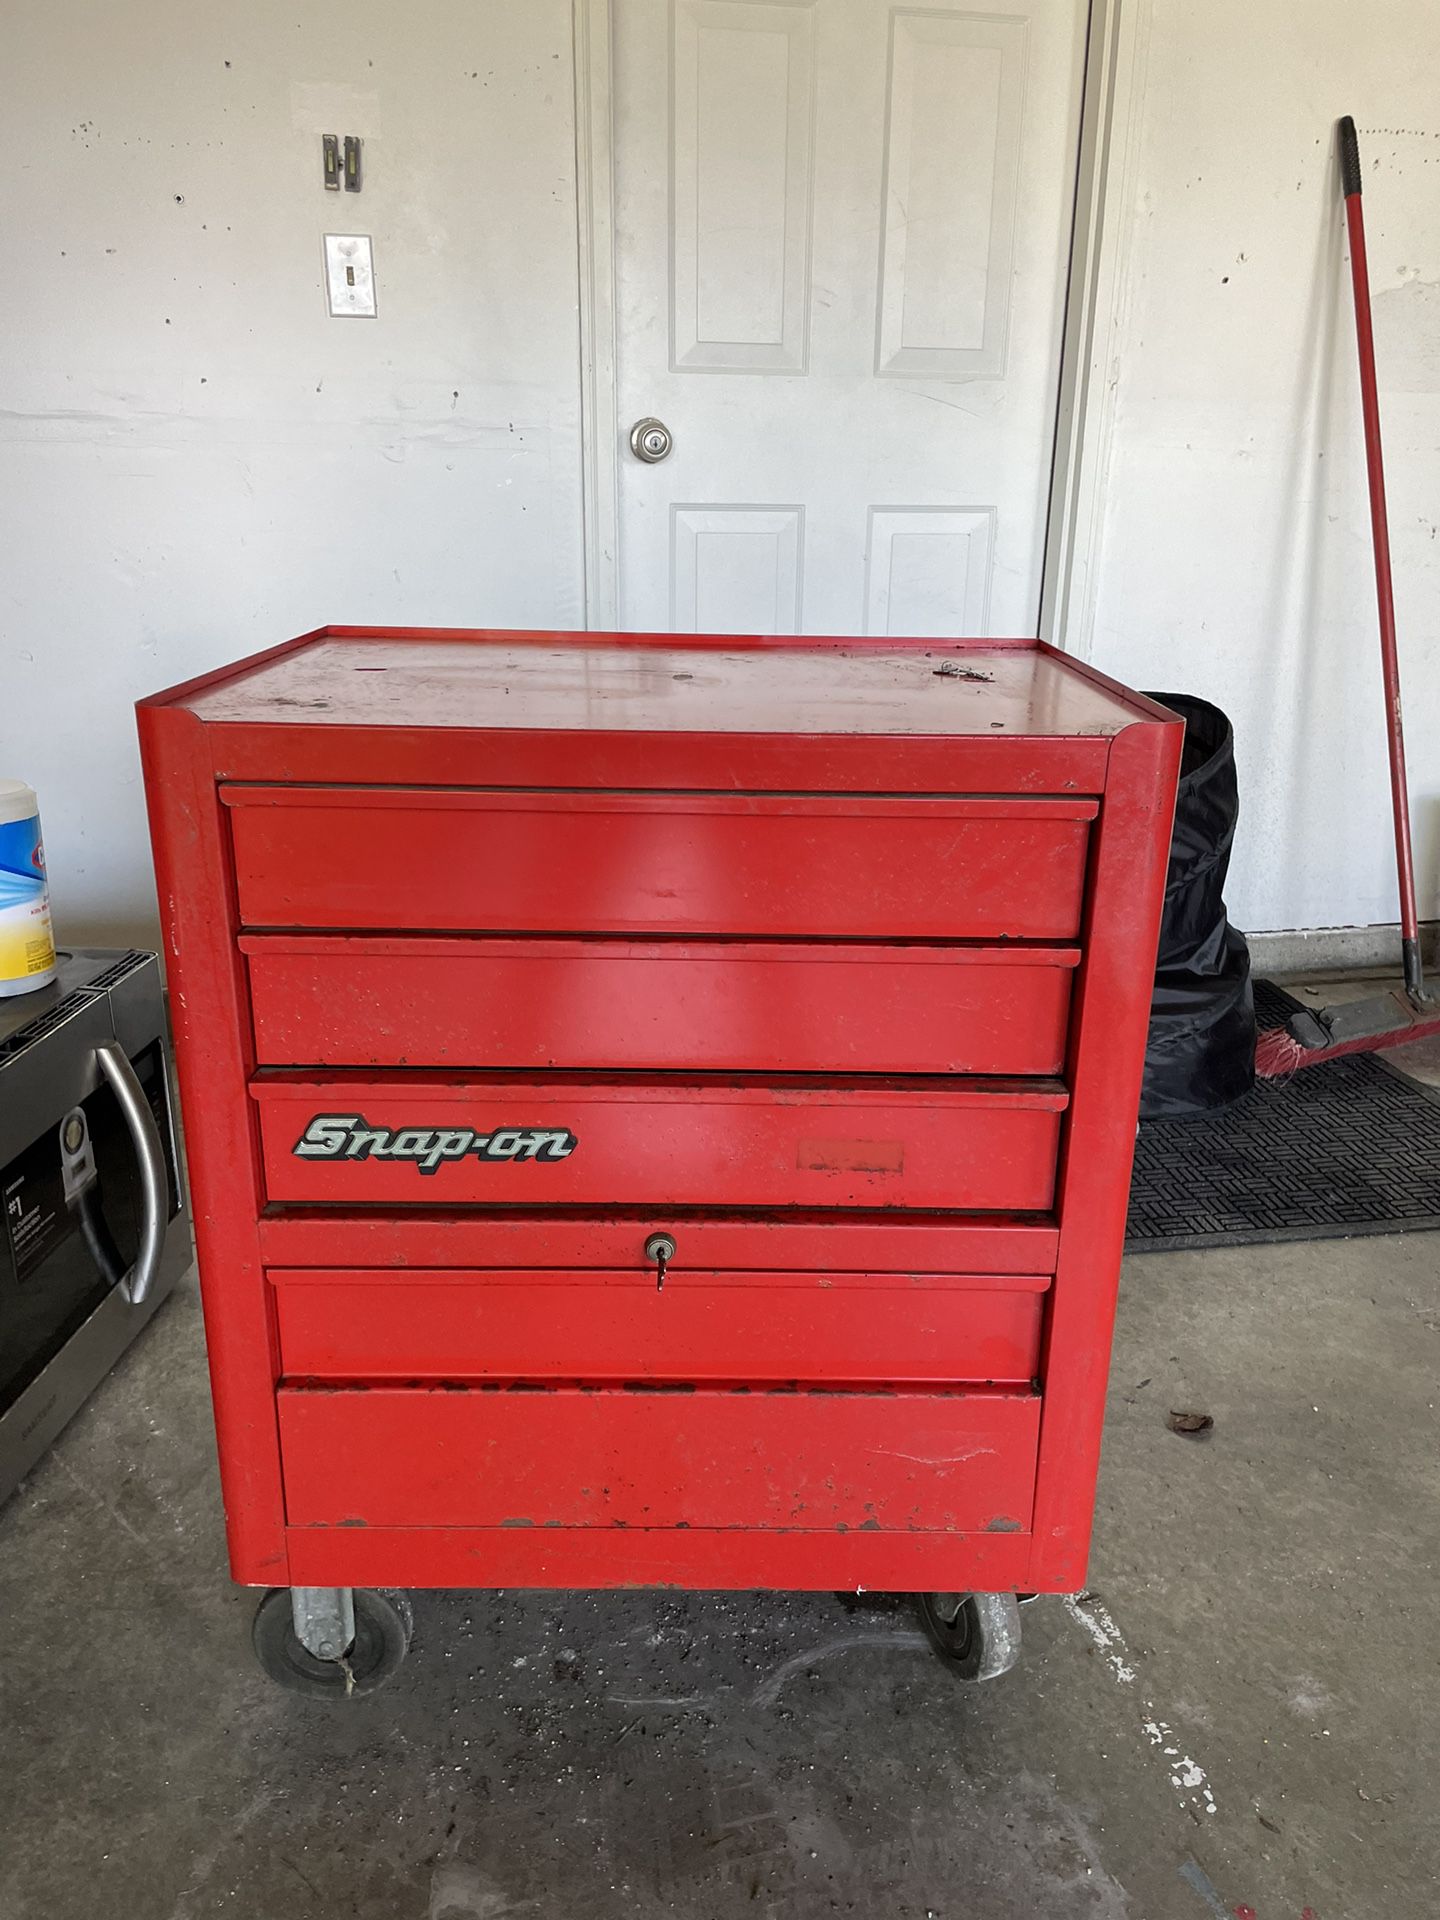 Snap-on Red Rolling Tool Chest